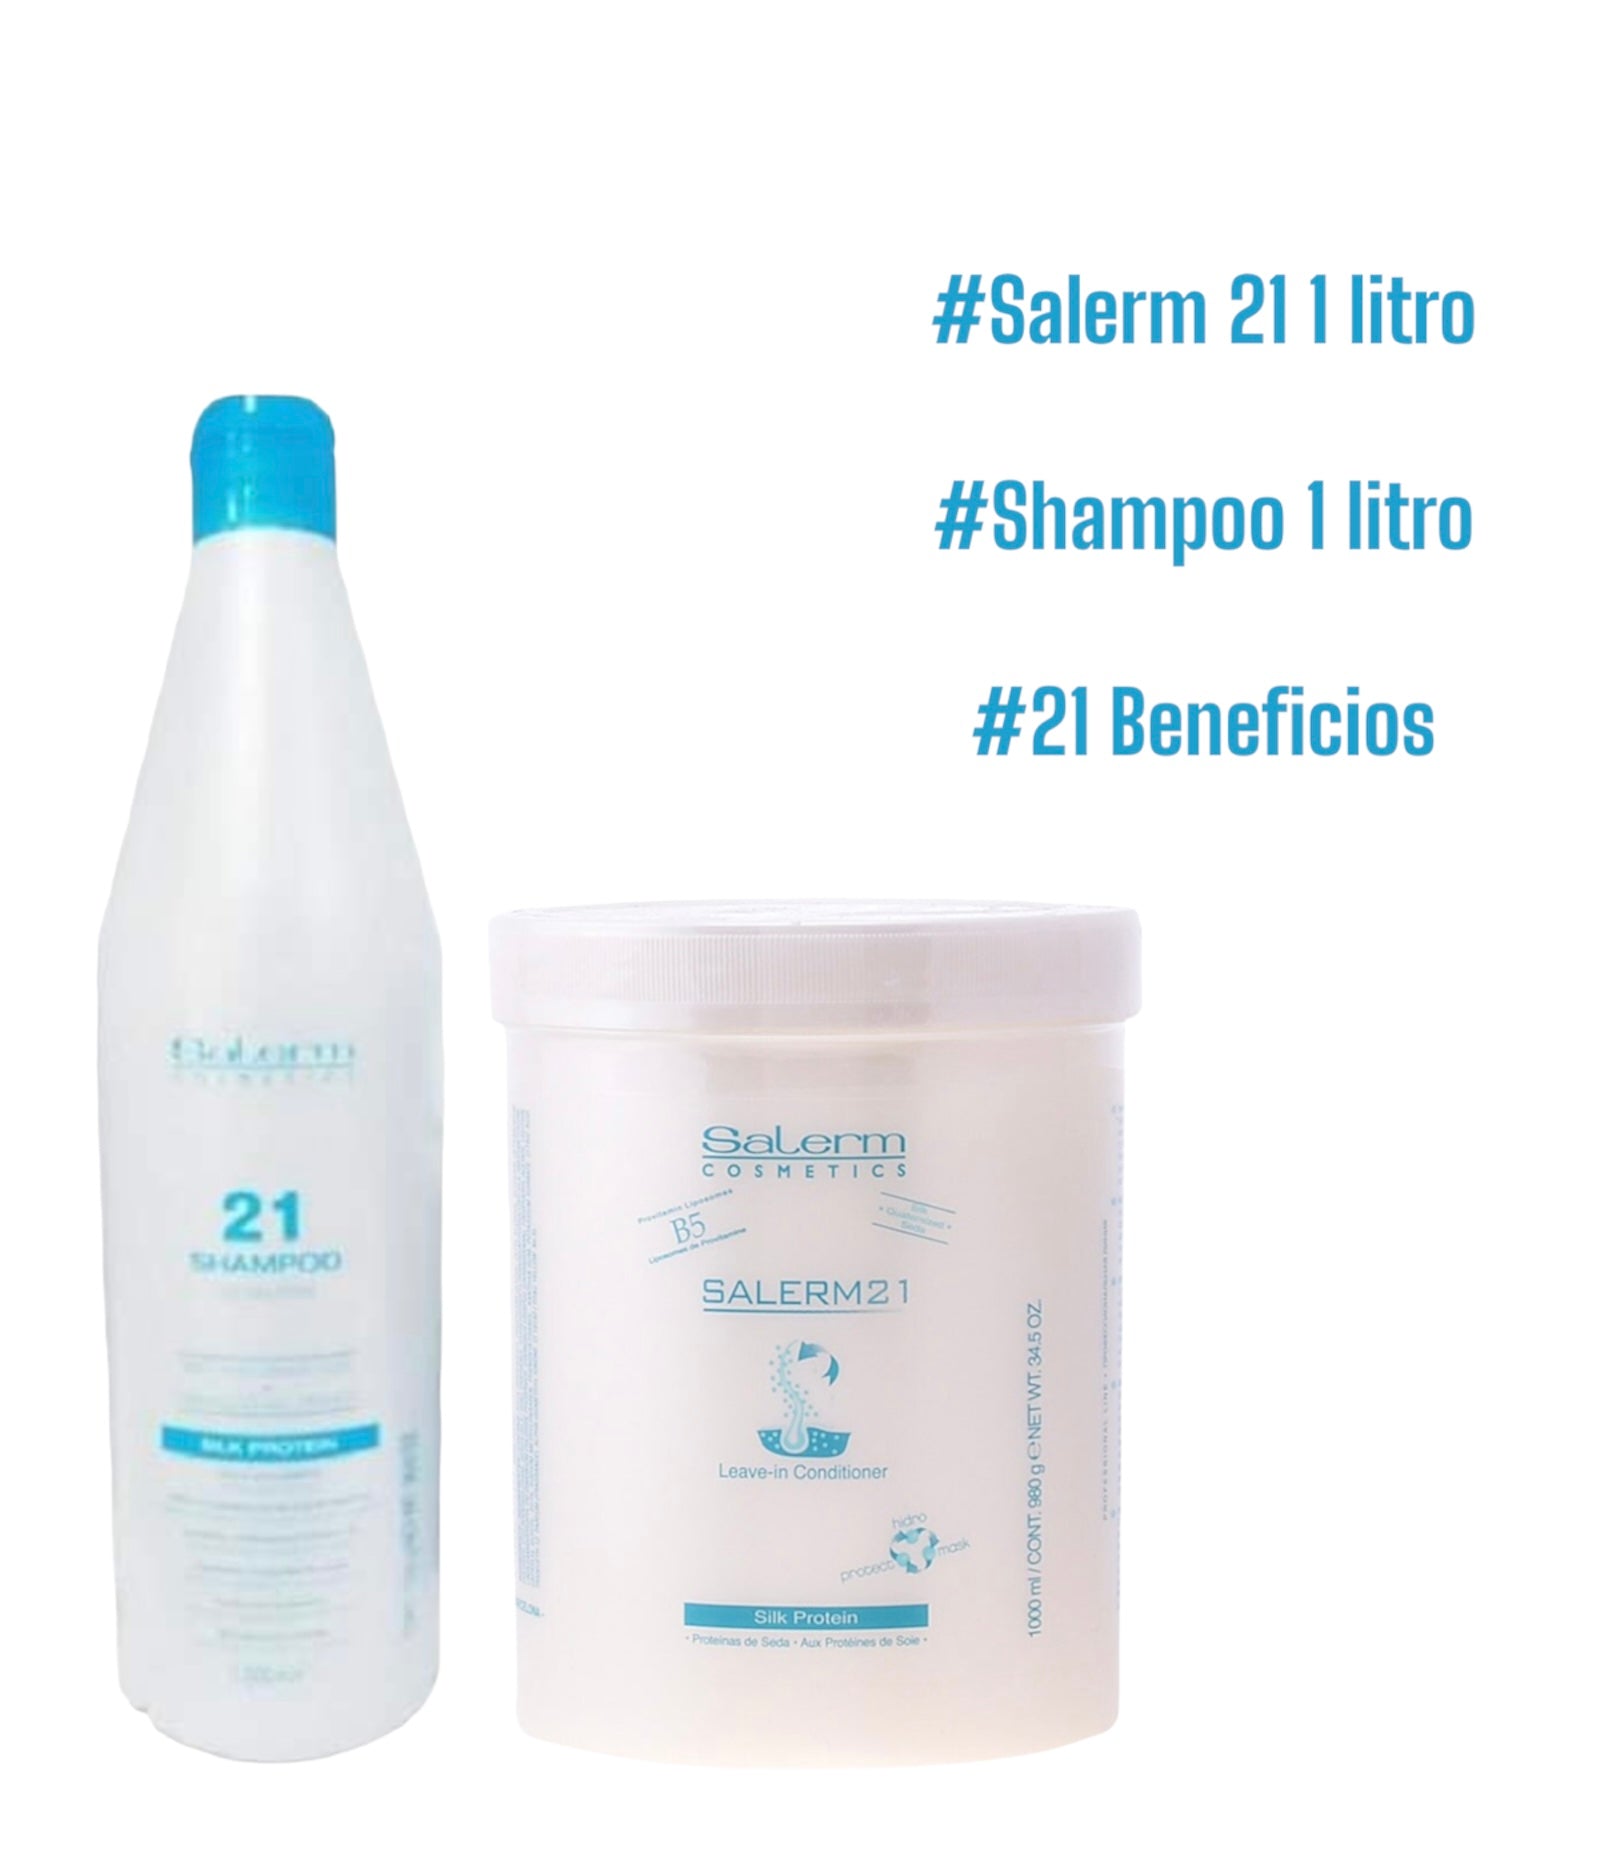 Salerm 21 B5 Silk Protein Leave-in Conditioner 34.5oz / 1000ml Pack of 2  